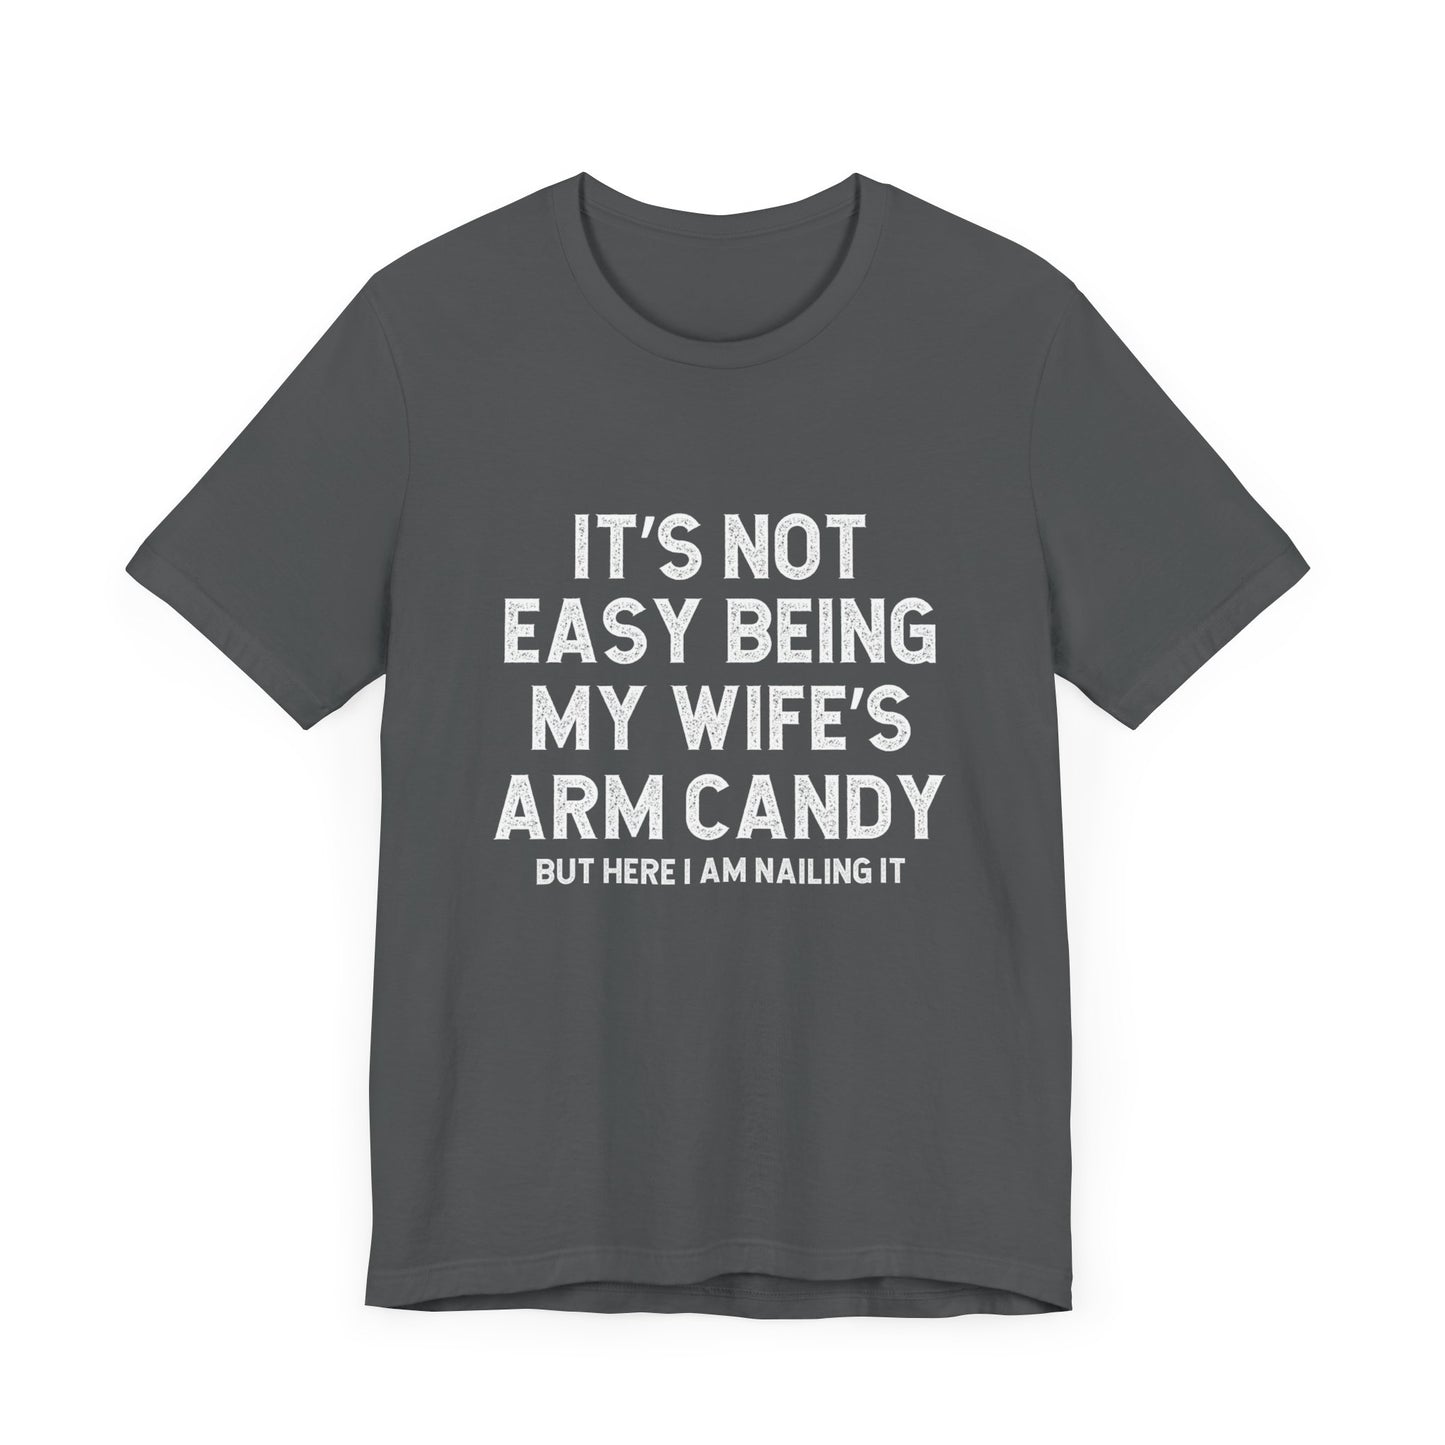 Wife's Arm Candy - Multi colors /sizes available - Jersey Short Sleeve Tee